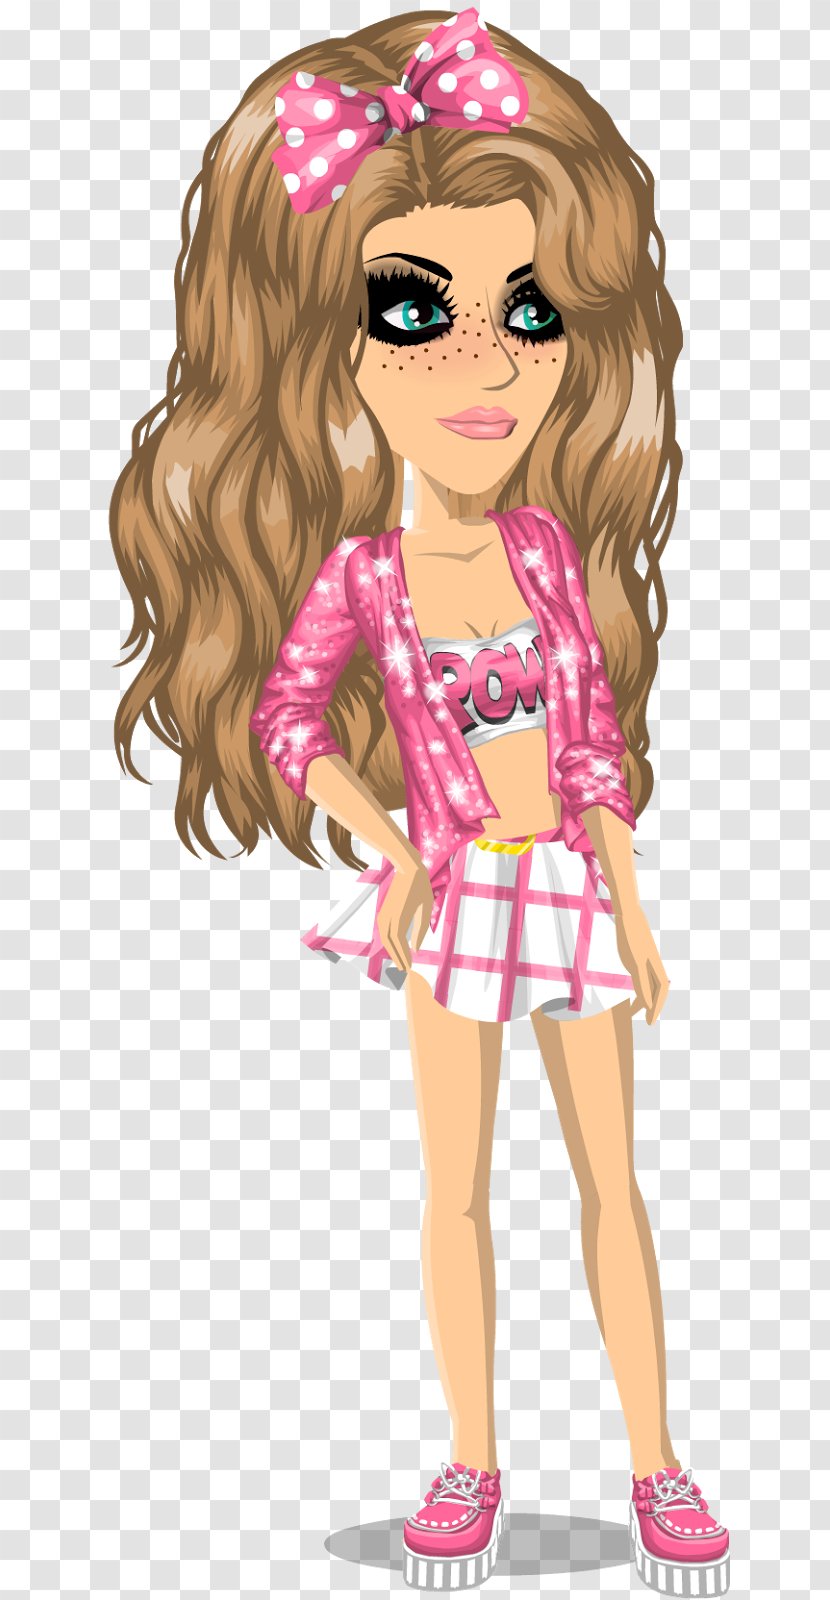 MovieStarPlanet Game Google Search Avatar - Heart - Planet Doodle Transparent PNG